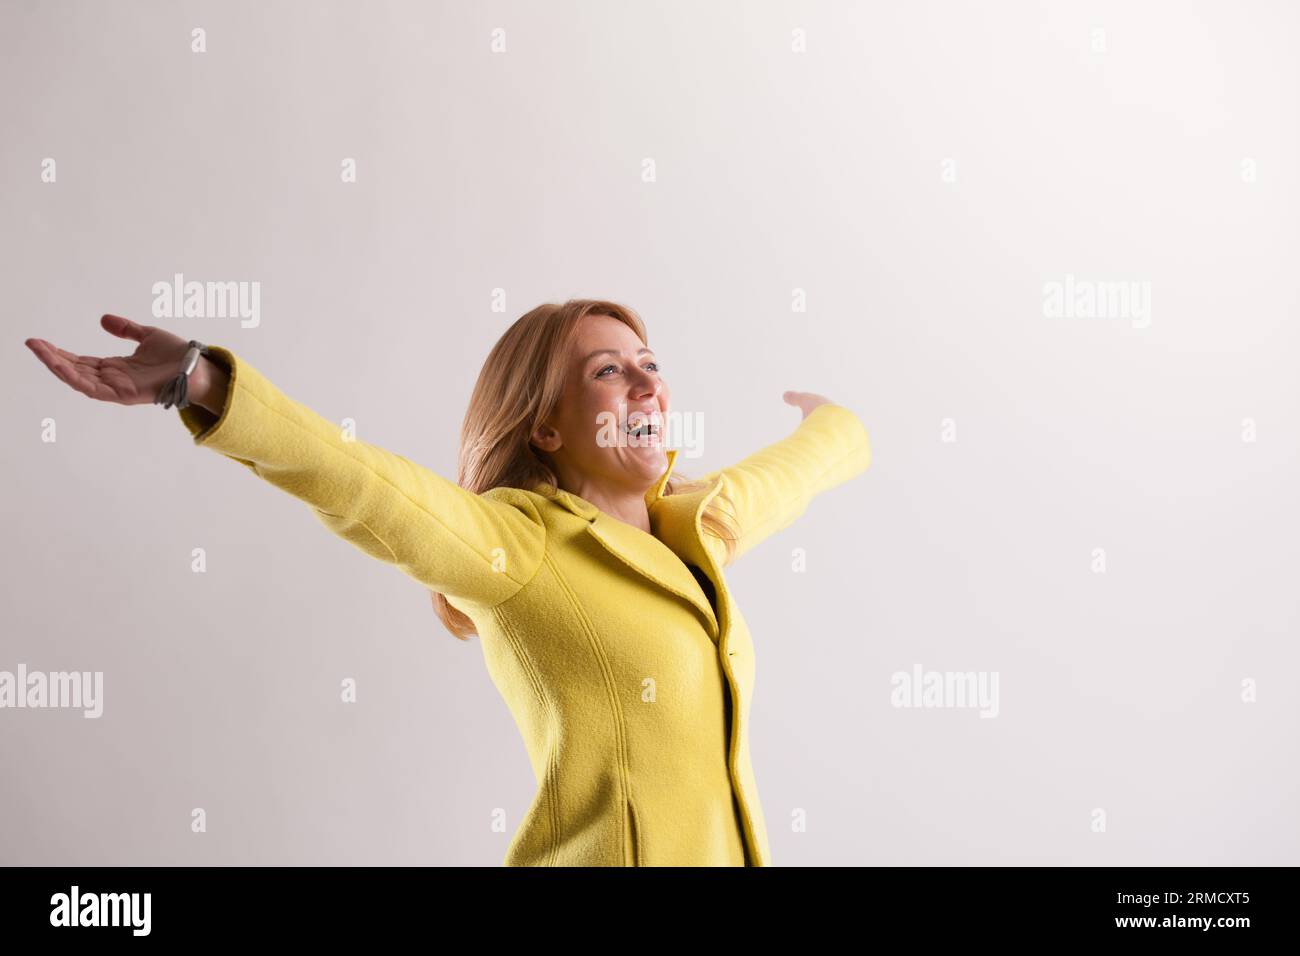 Expressing boundless joy with arms outstretched, a blonde woman savors life's essence. She looks up, recognizing her blessings and showing profound gr Stock Photo